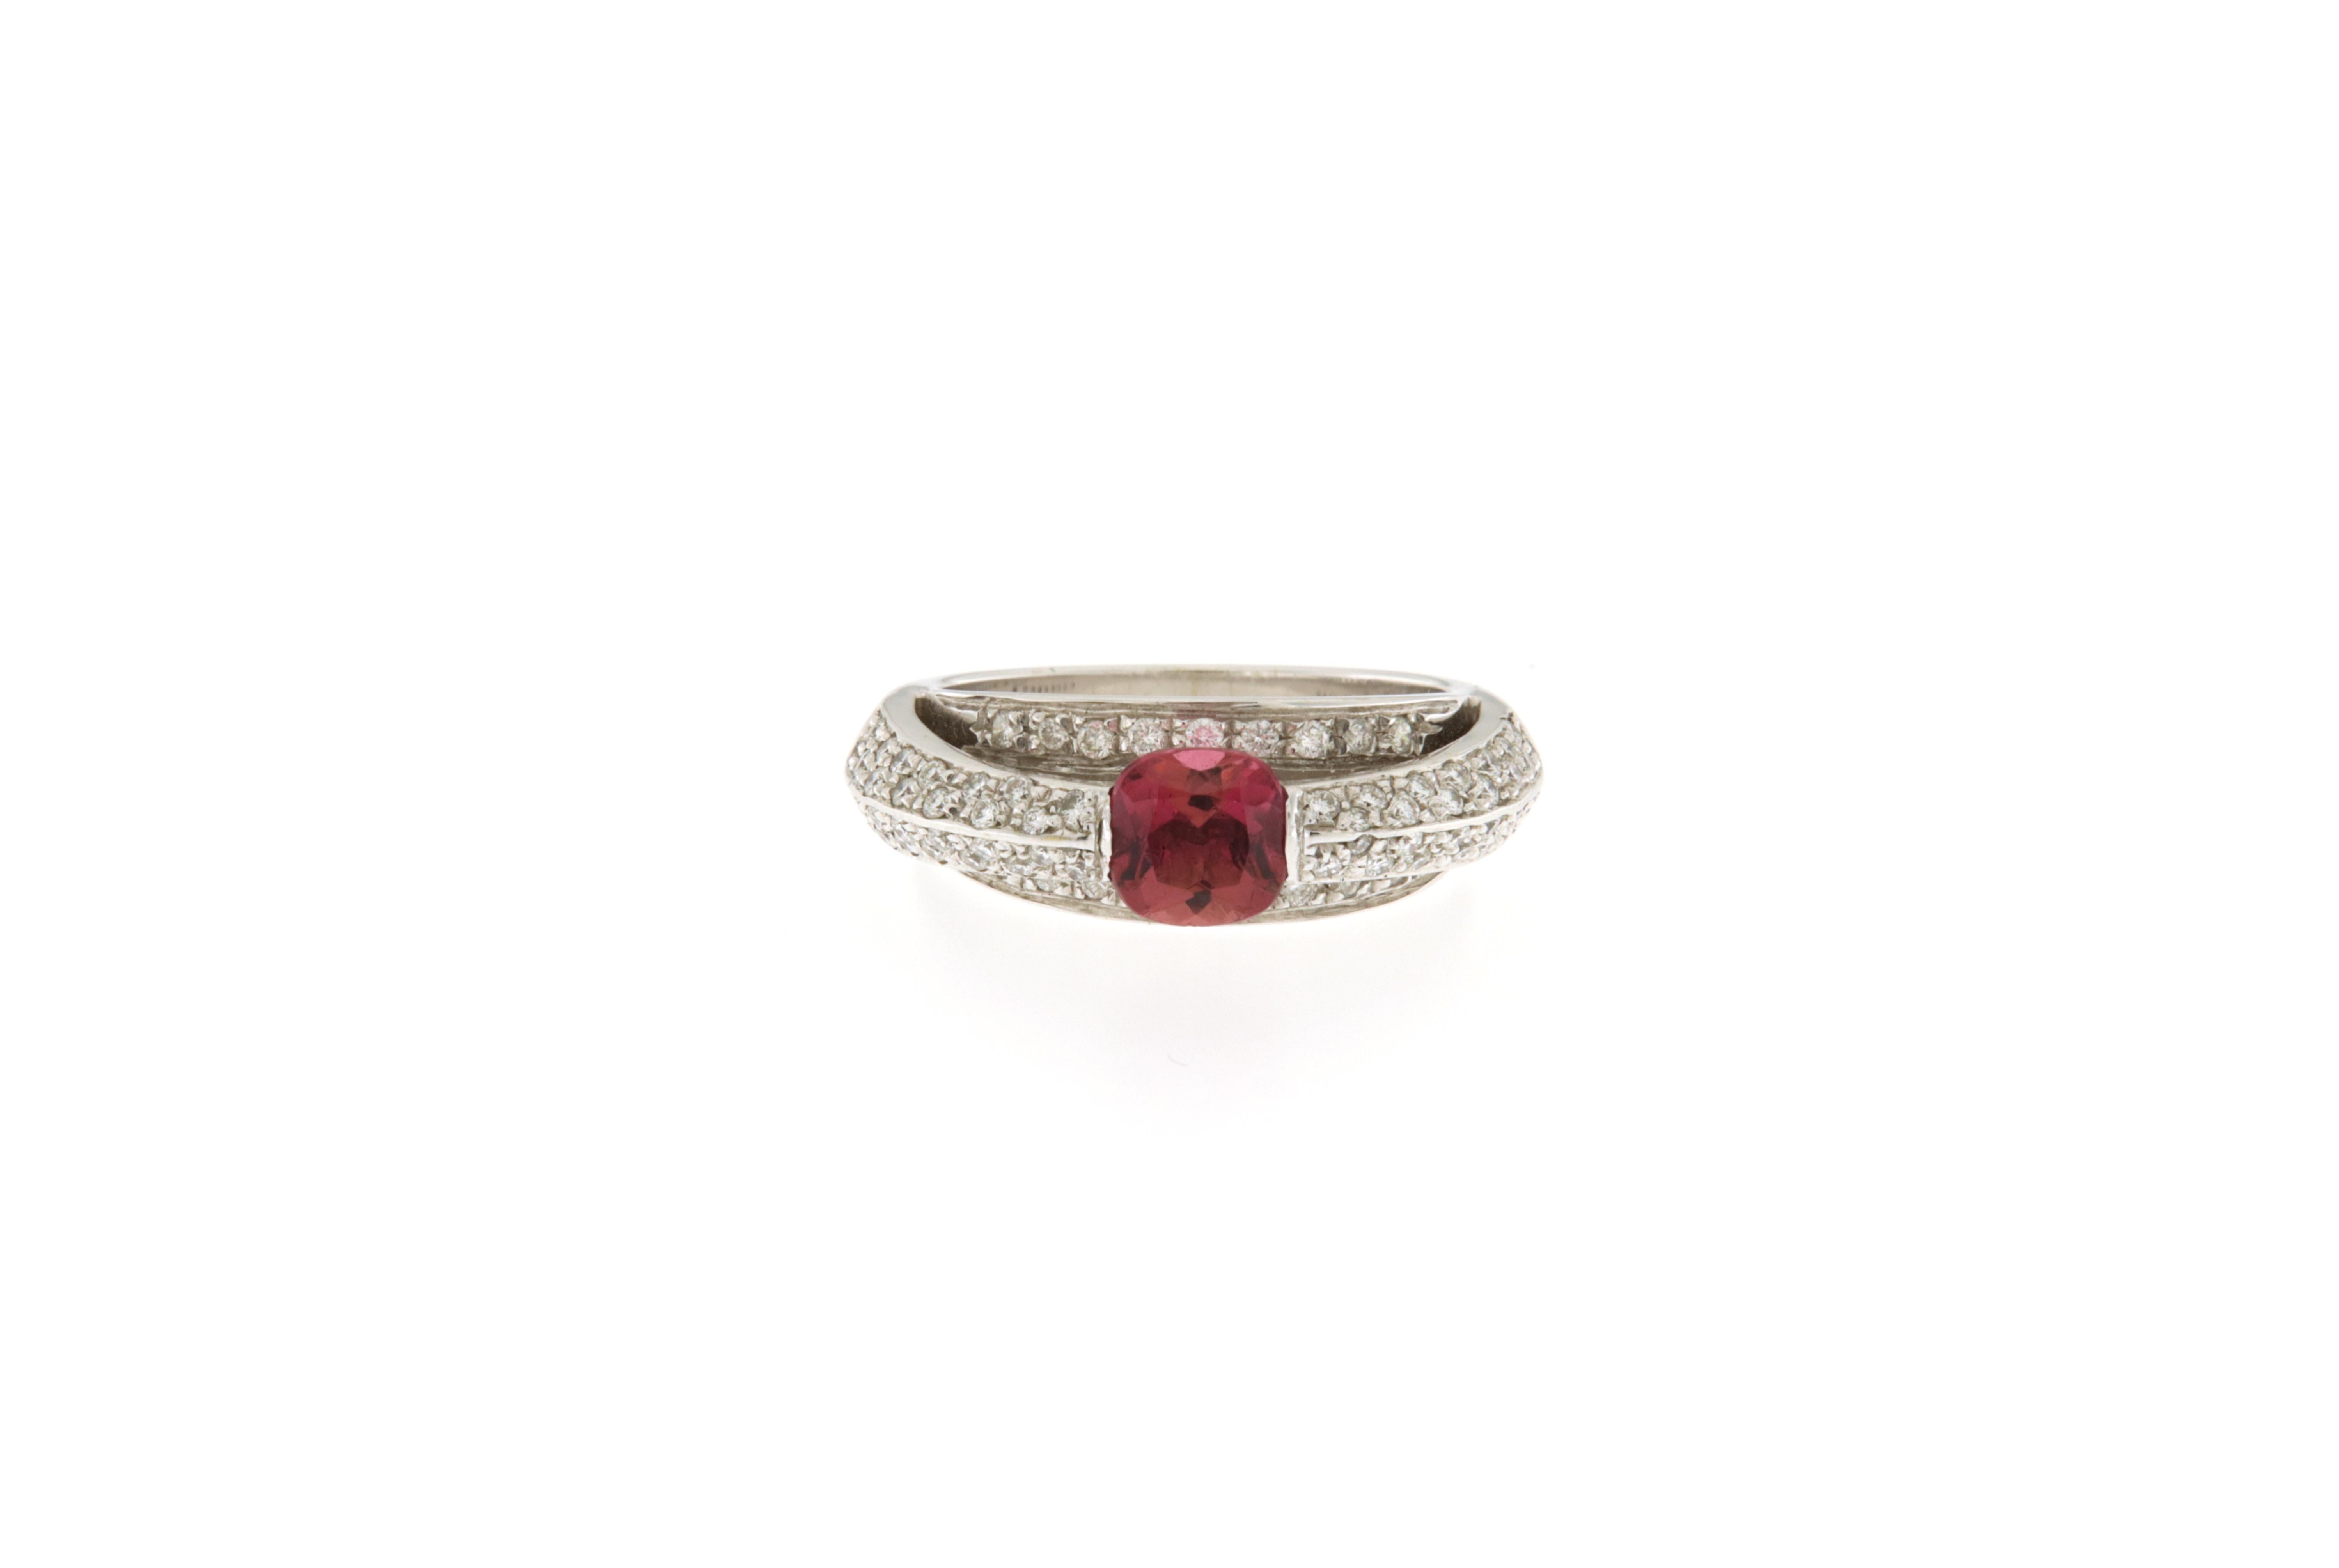 Very nice ring with particular italian design. It is like a ring in another ring with diamonds under and over. The upper ring has got a very beautiful pink tourmaline in the center.